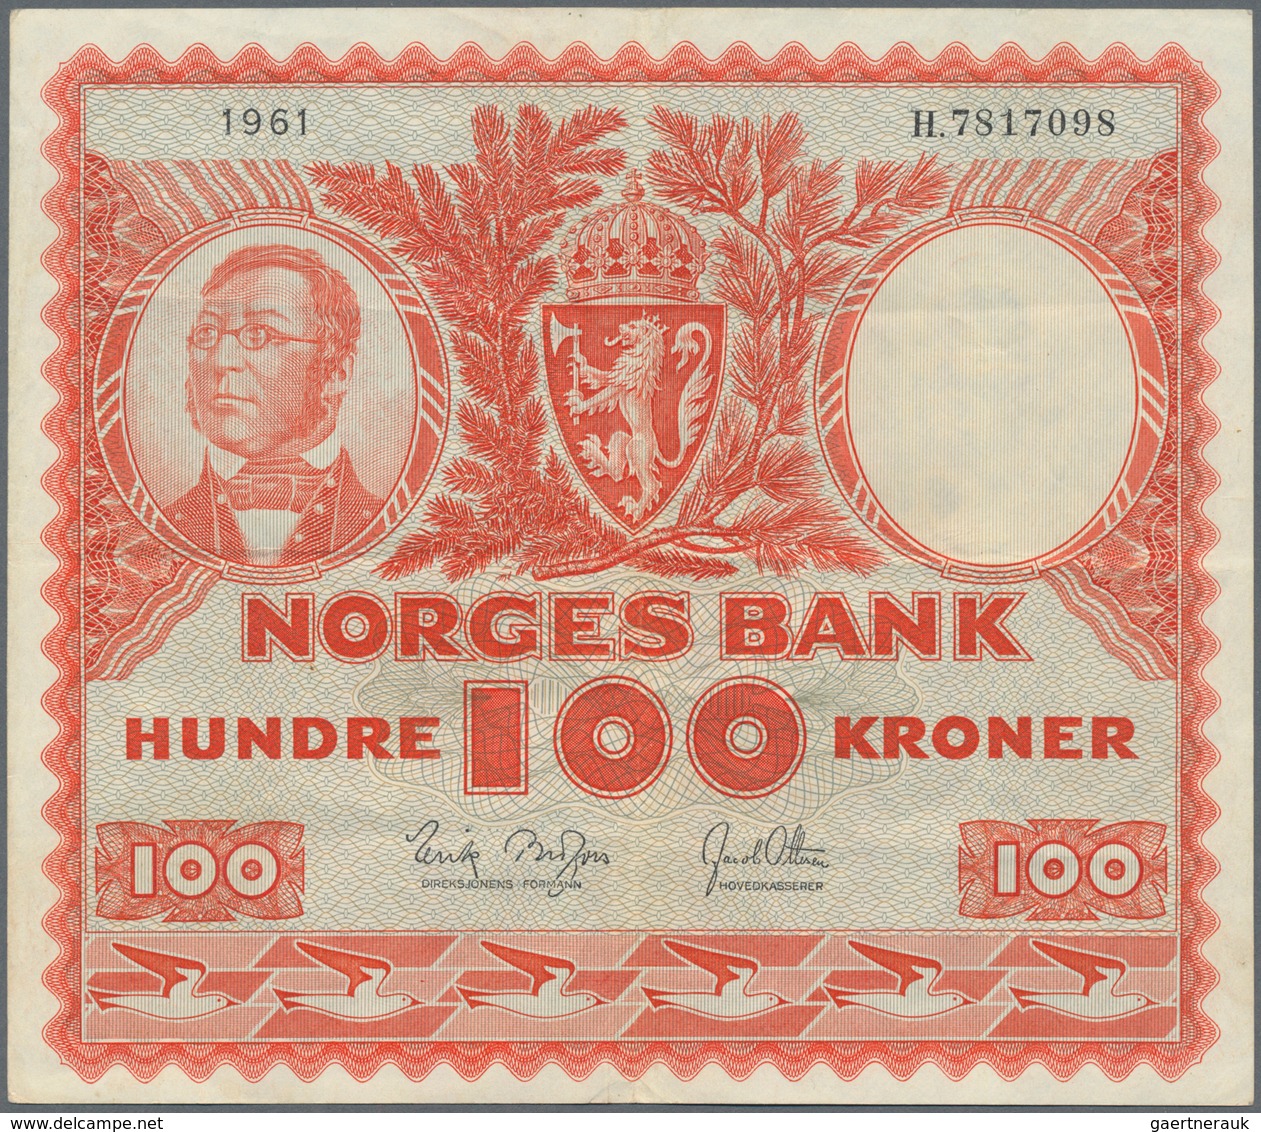 Norway / Norwegen: Norges Bank set with 4 banknotes 50 Kroner 1957, 1961 and 1963 P.32 (F/F+) and 10